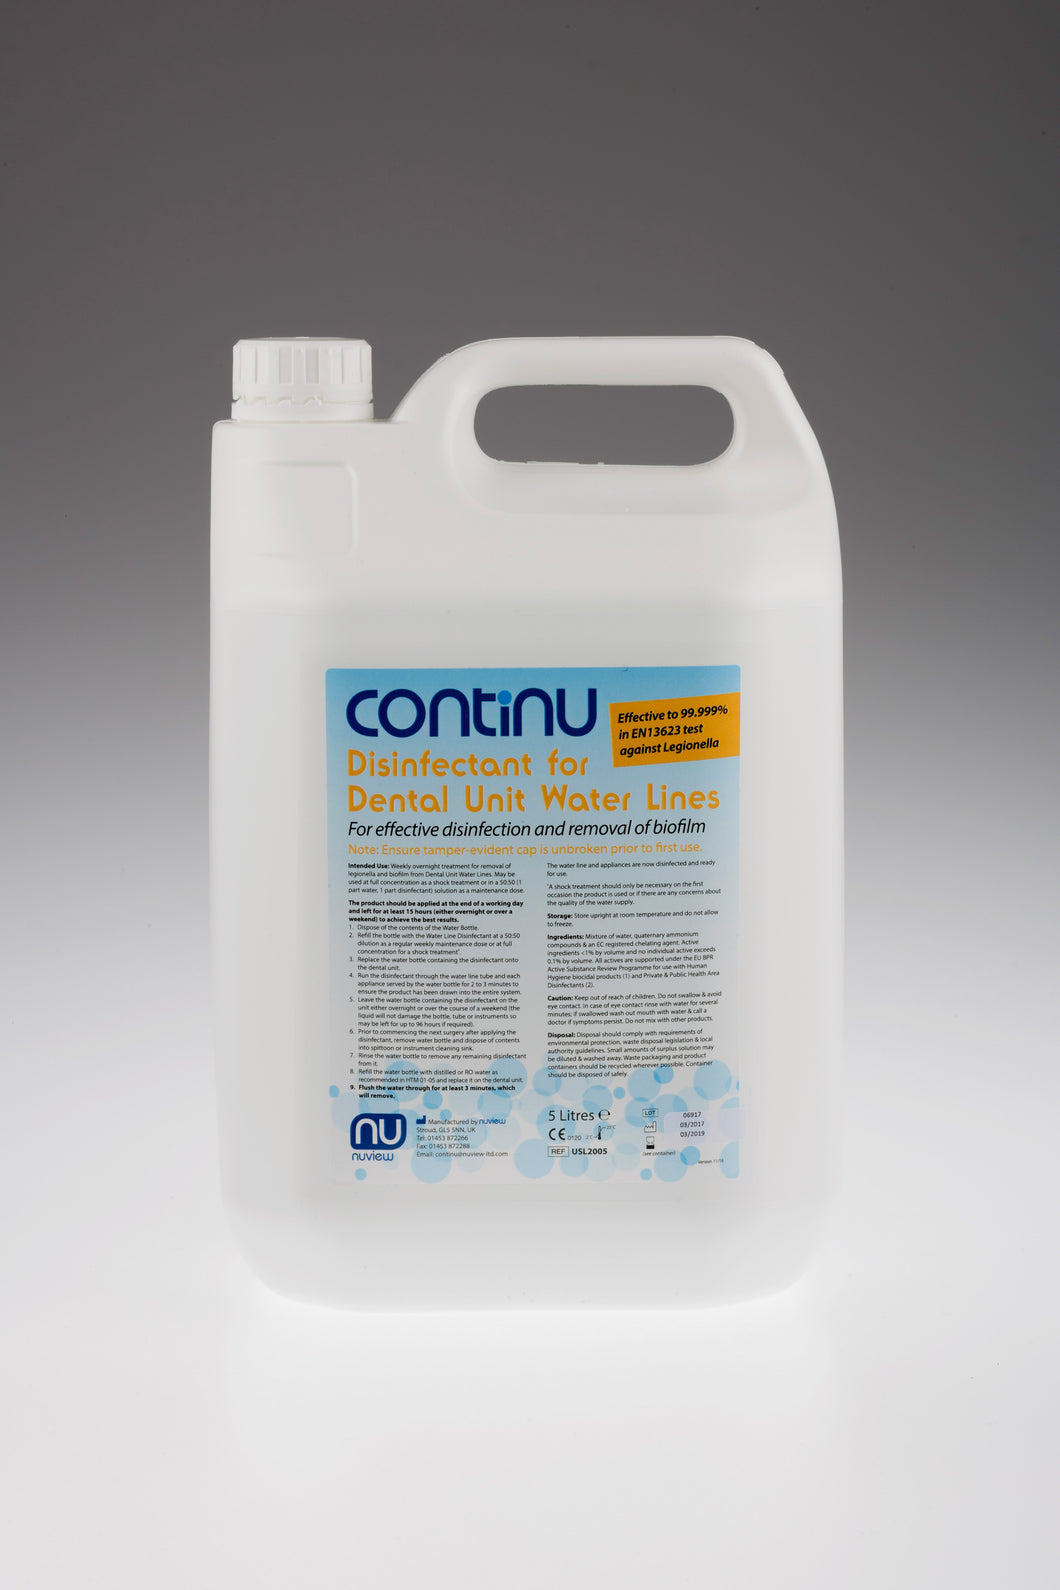 CONTINU Disinfectant for Dental Unit Water Lines 5L - 10 weeks worth